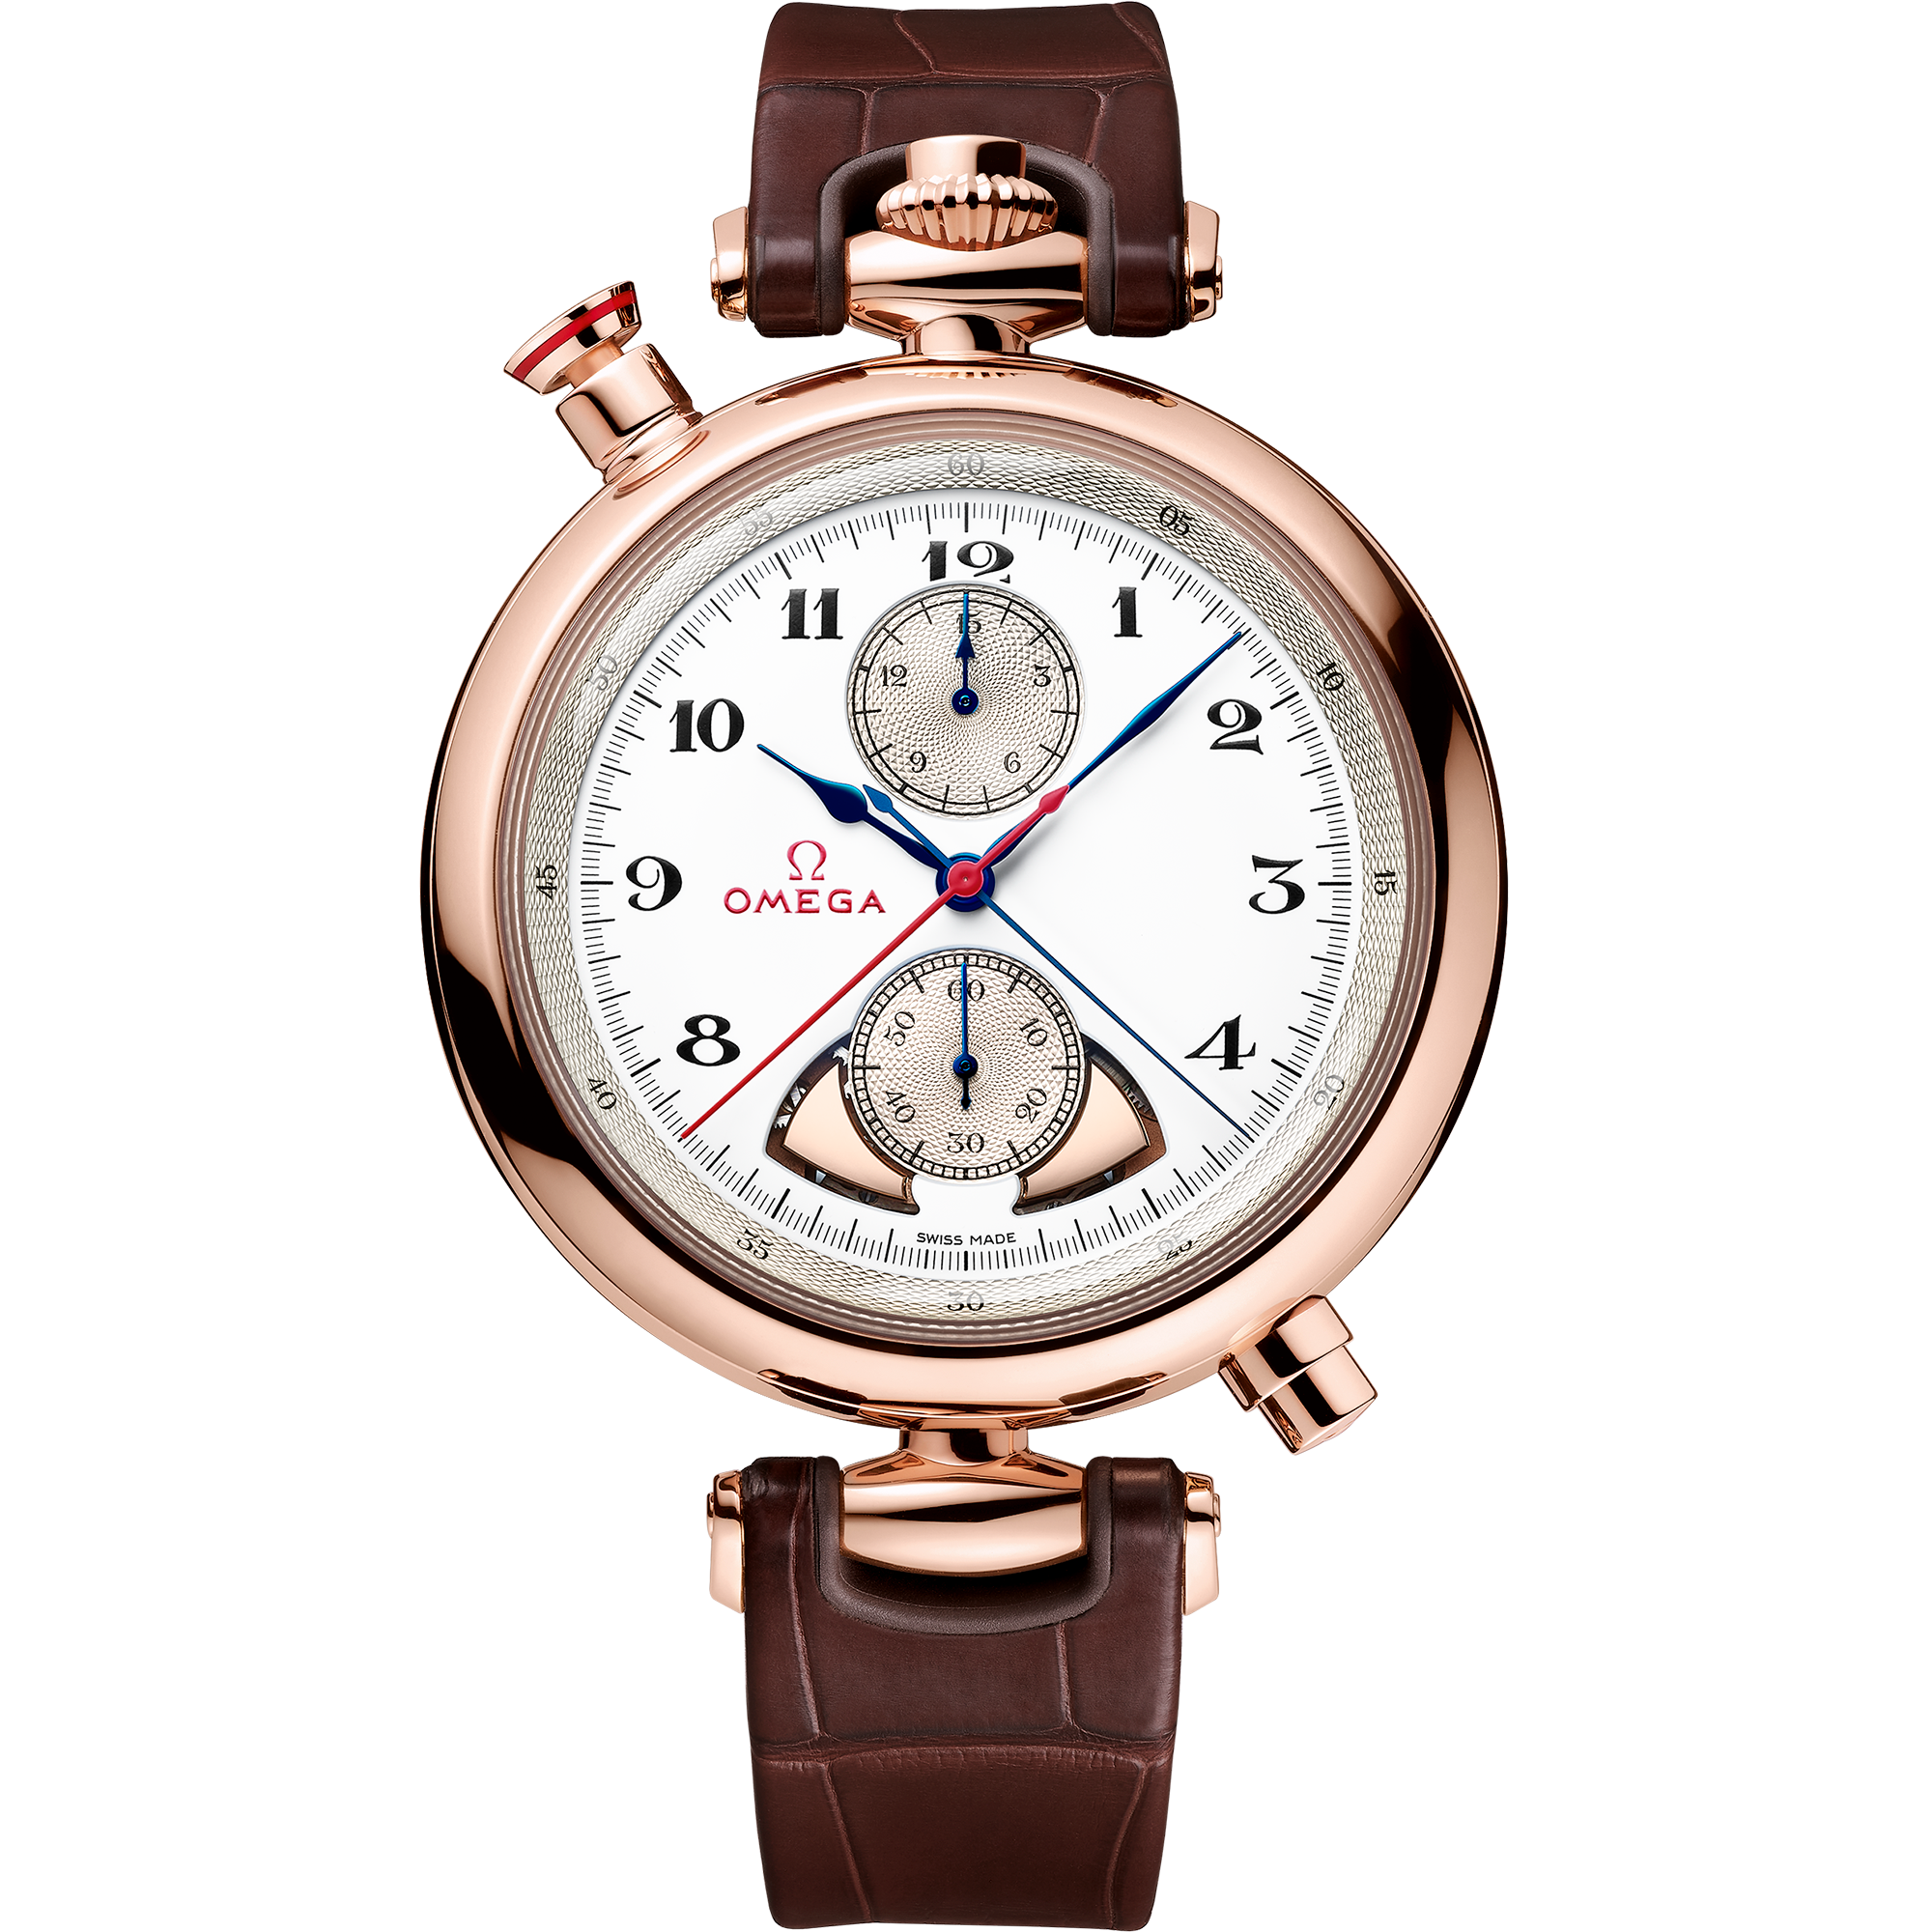 Specialities Olympic 1932 Chrono Chime 45 mm, Sedna™ gold on leather strap - 522.53.45.52.04.001